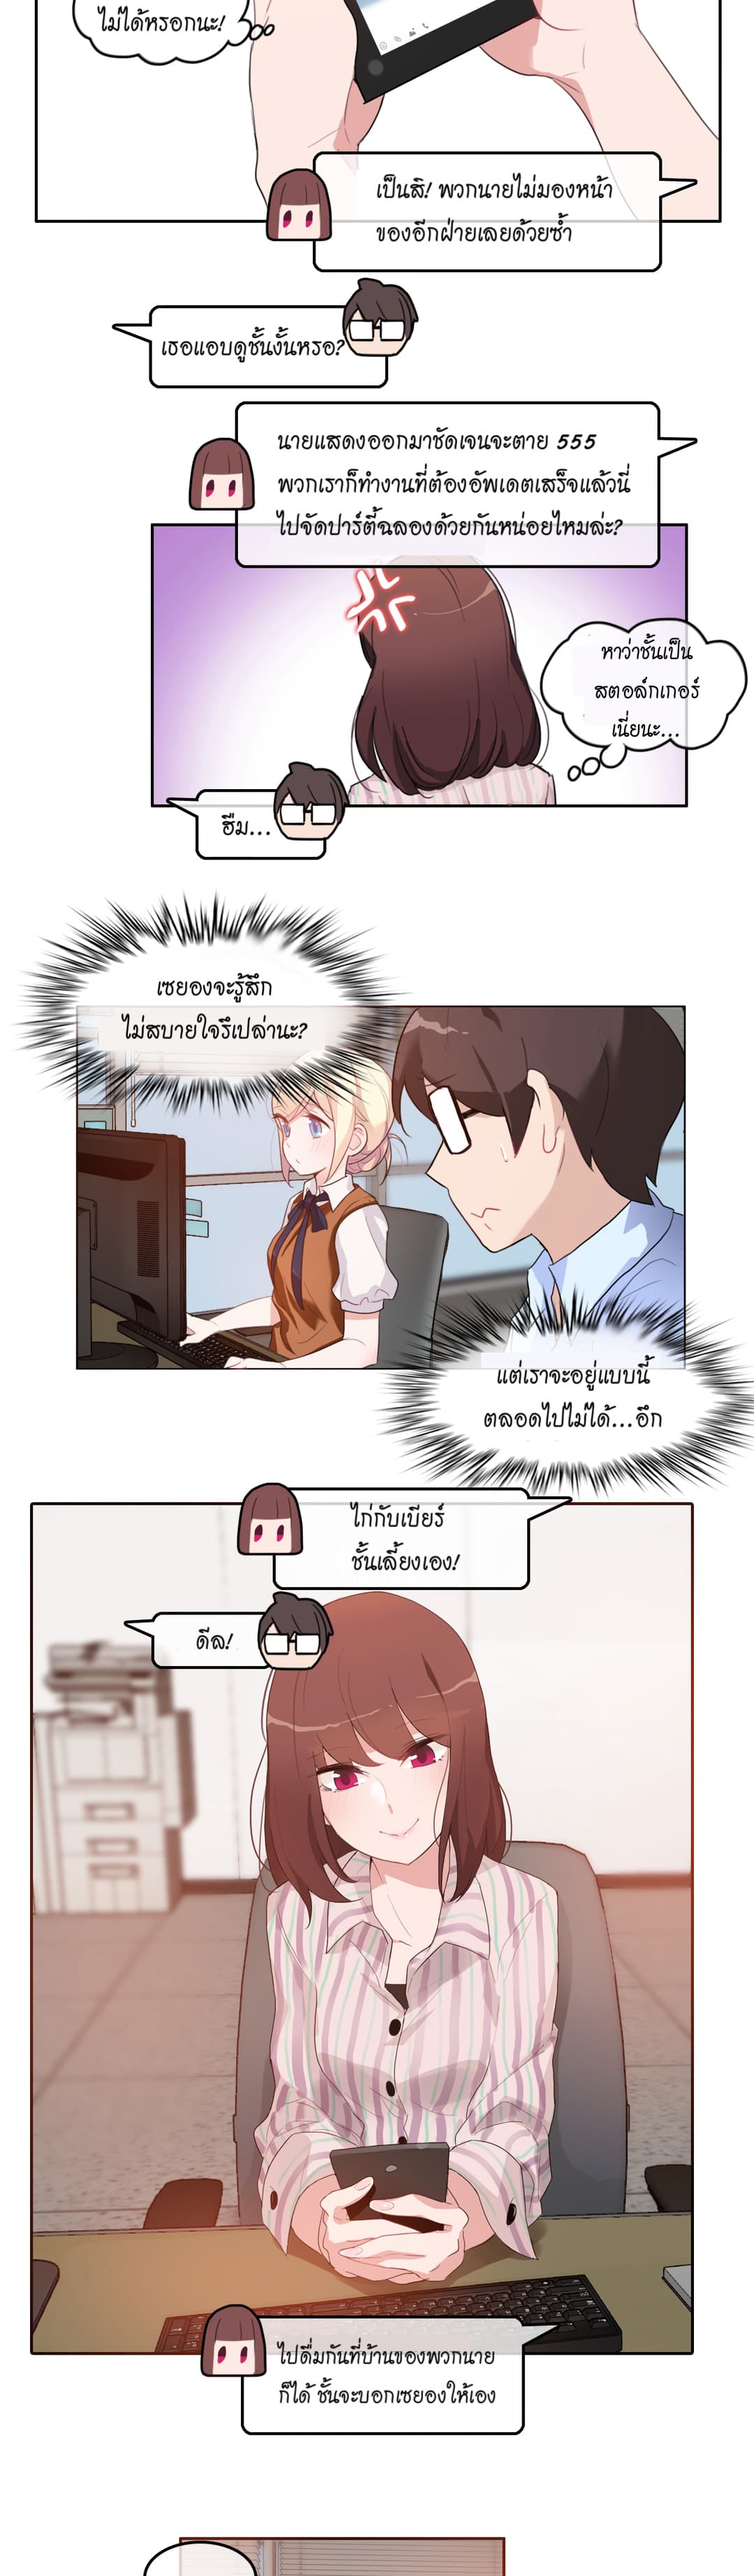 A Pervert’s Daily Life 9 (4)